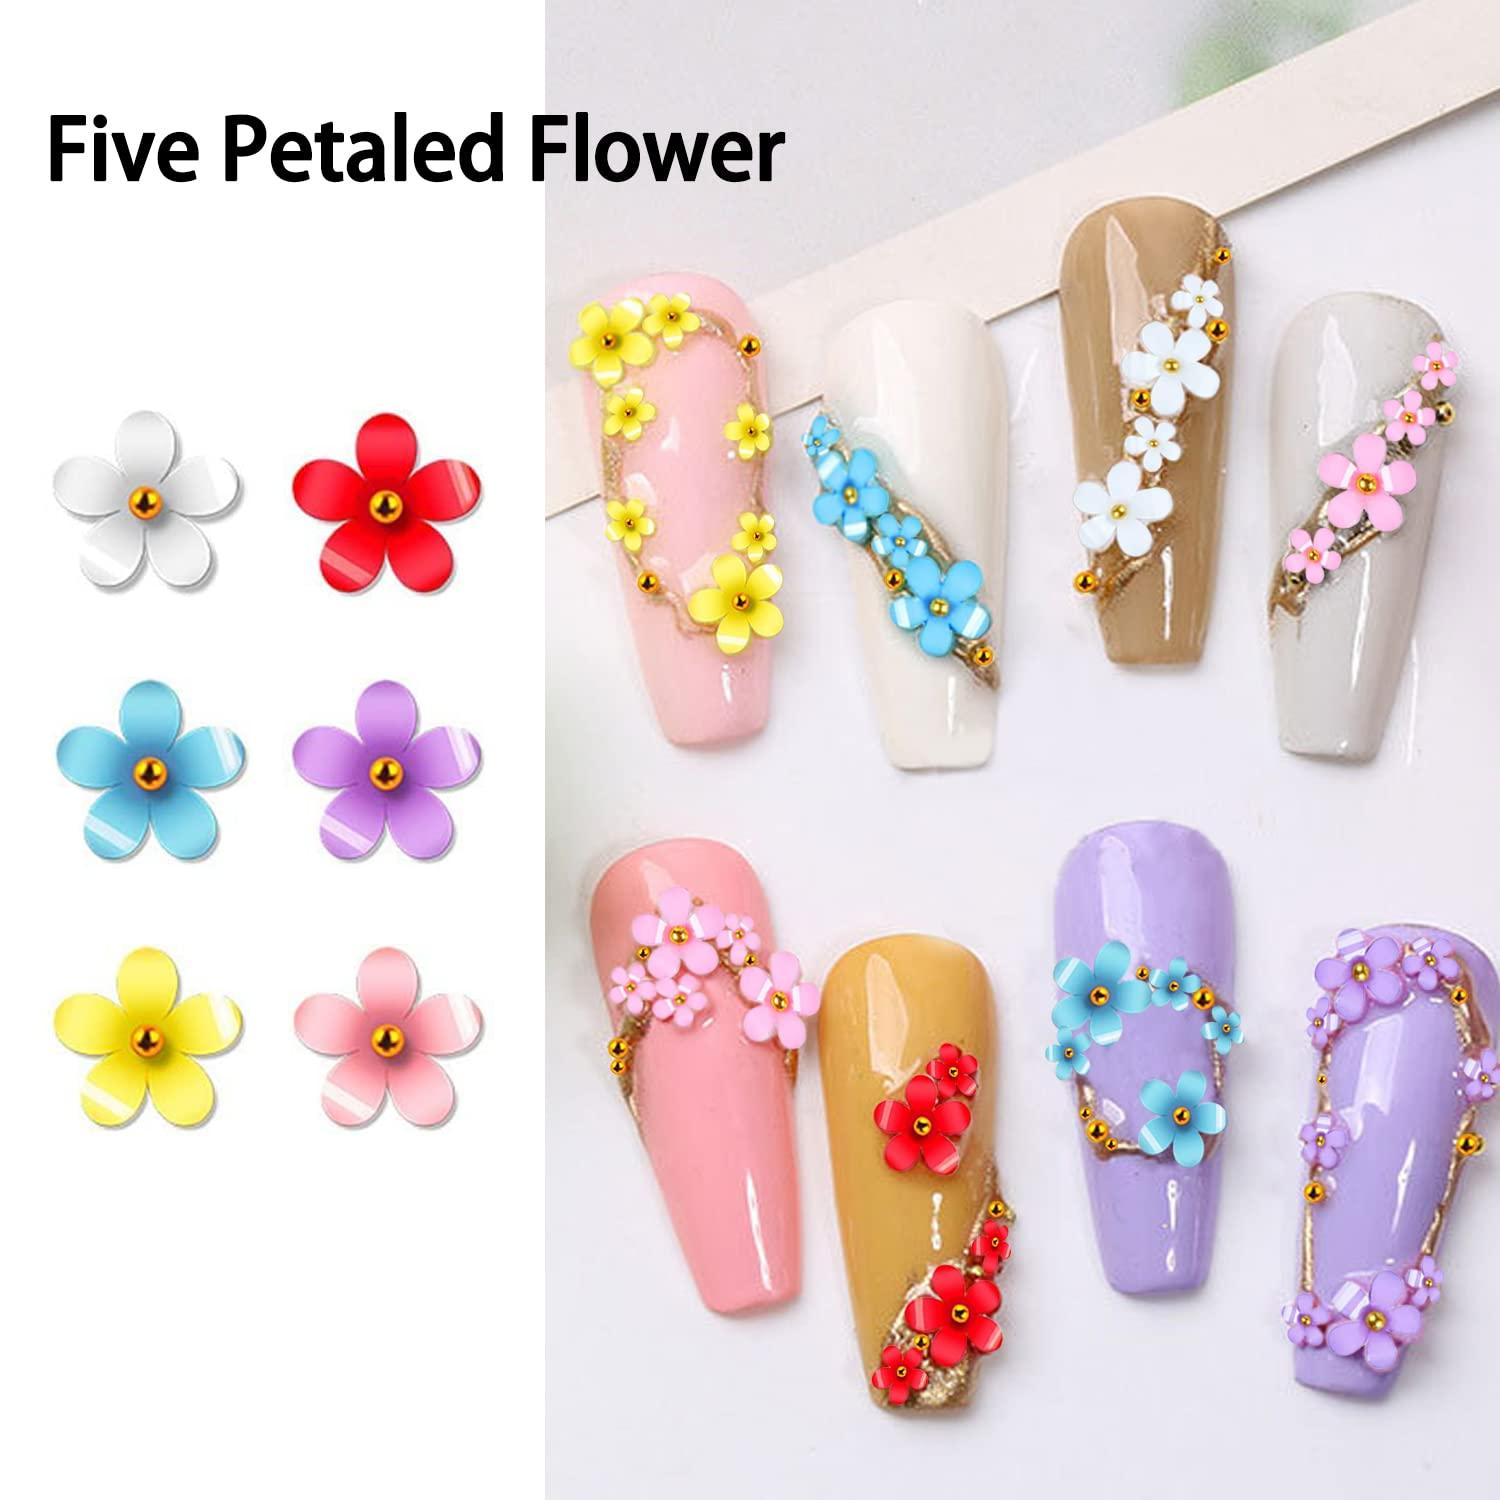 3D Flower Nail Charms 6 Grids 3D Nail Flowers Rhinestones for Acrylic Nails  Acrylic Flowers for Nails with Gold Silver Beads Resin Floral Nail Art  Charms for DIY Nail Decorations 3D Flower